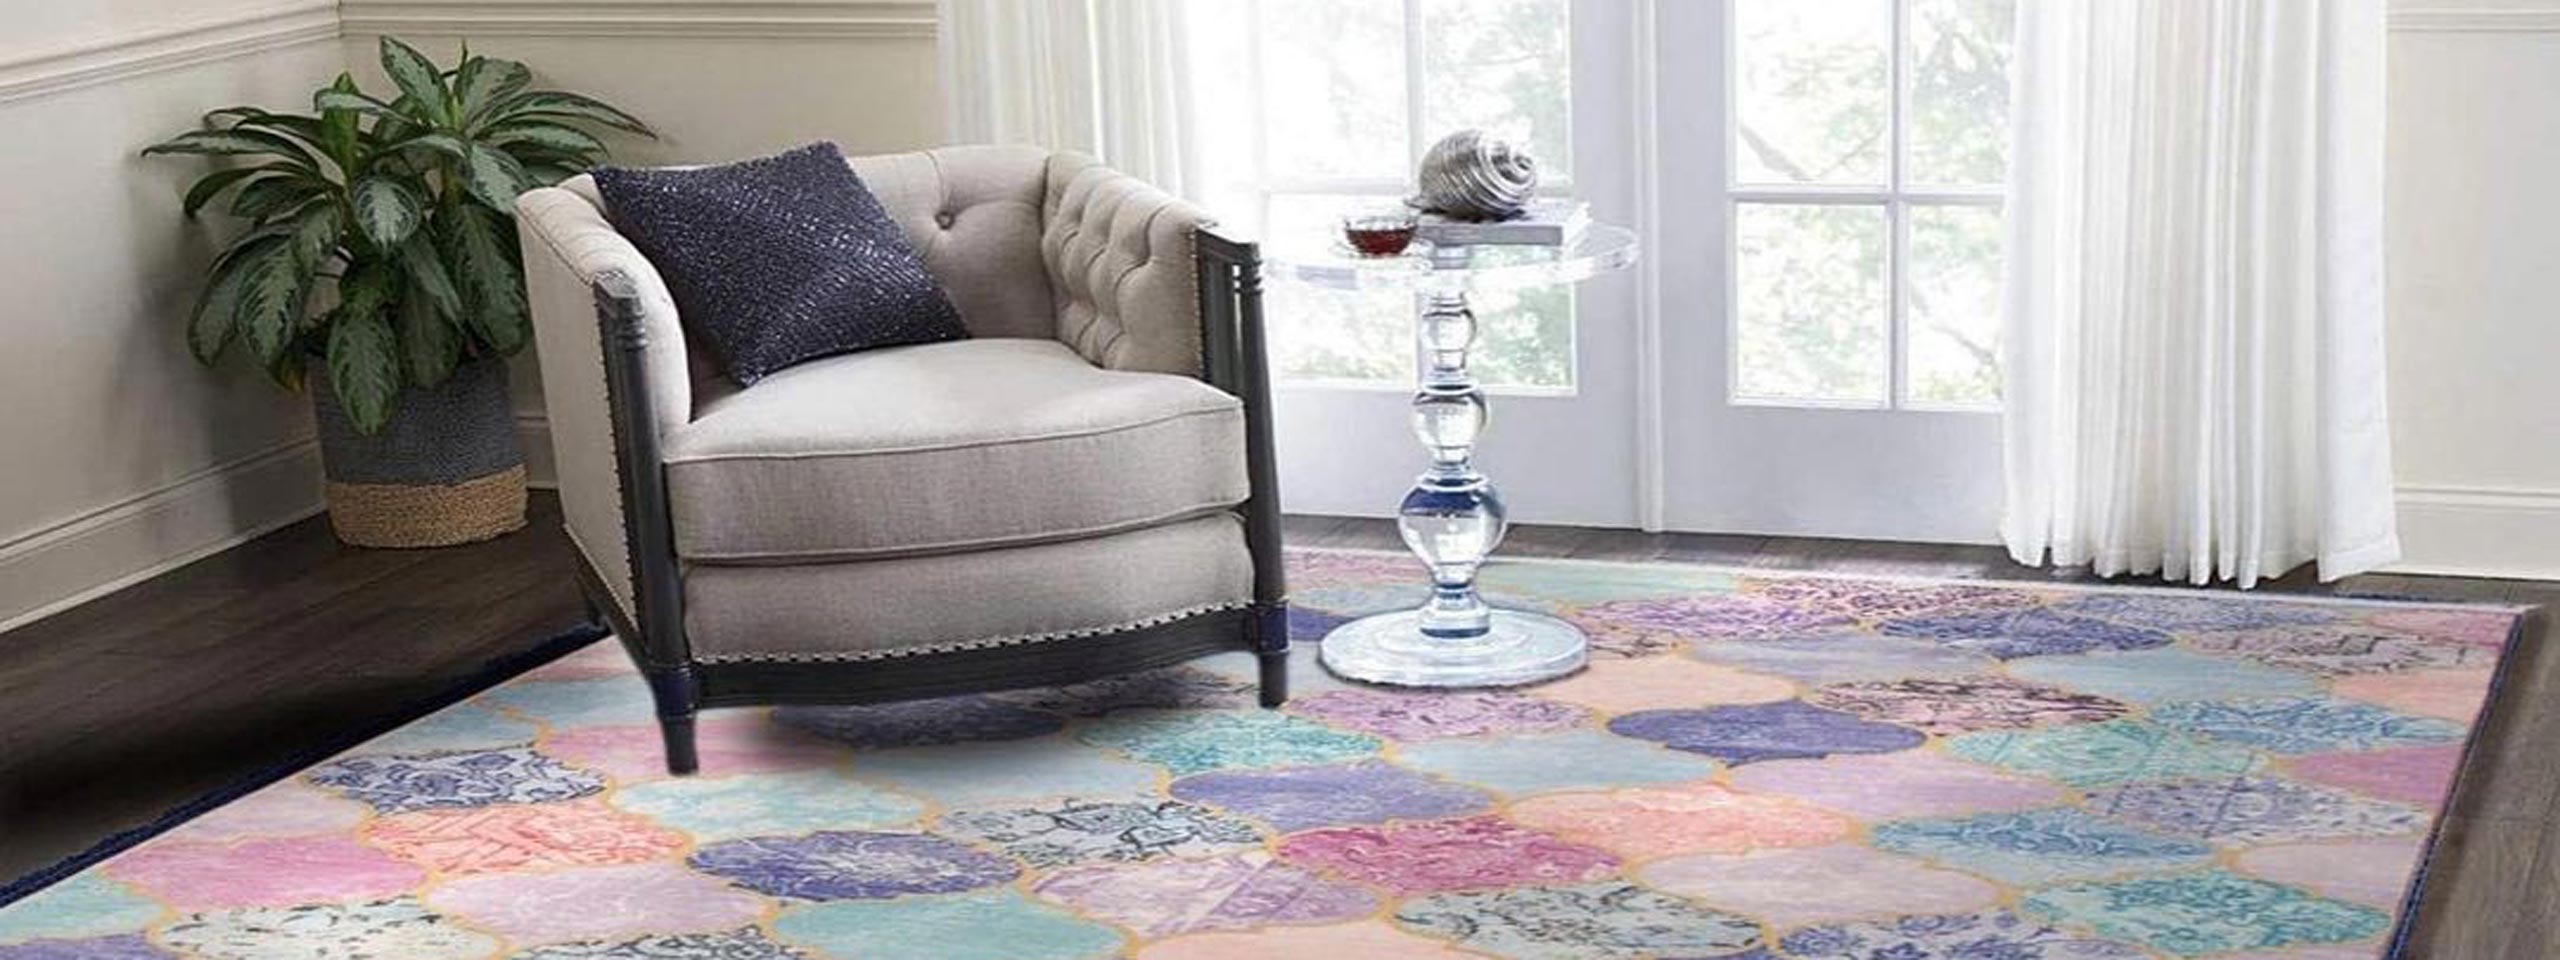 Pink Persian rug: How to set a pink Persian rug with furniture